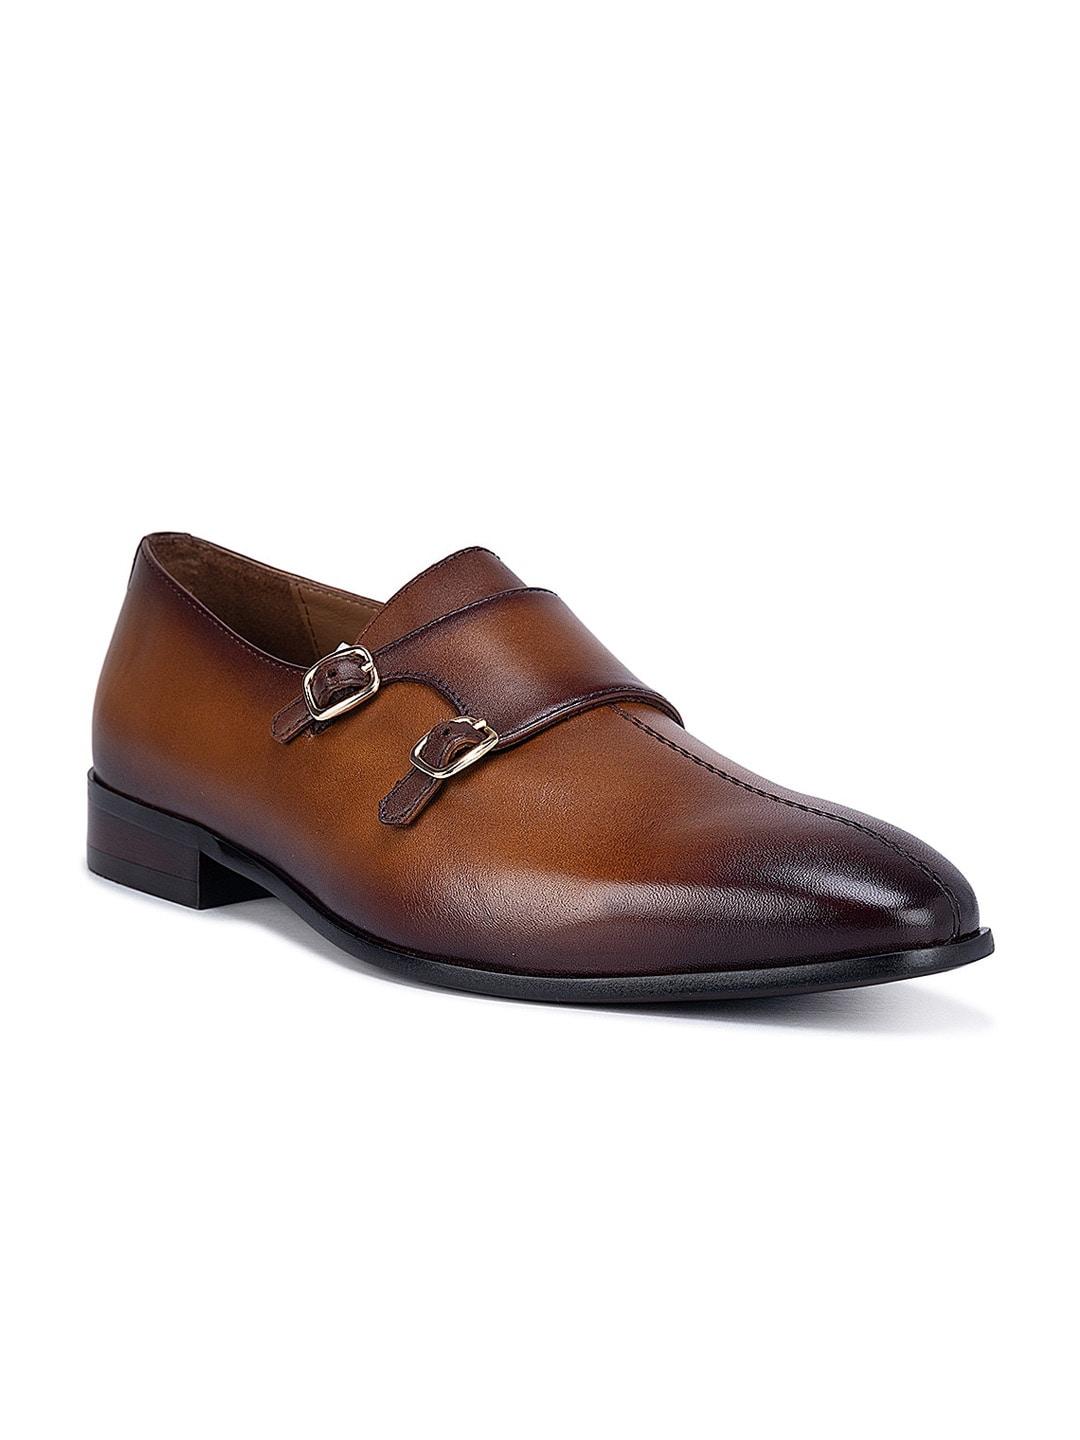 ROSSO BRUNELLO Men Textured Pointed Toe Leather Slip-On Formal Shoes